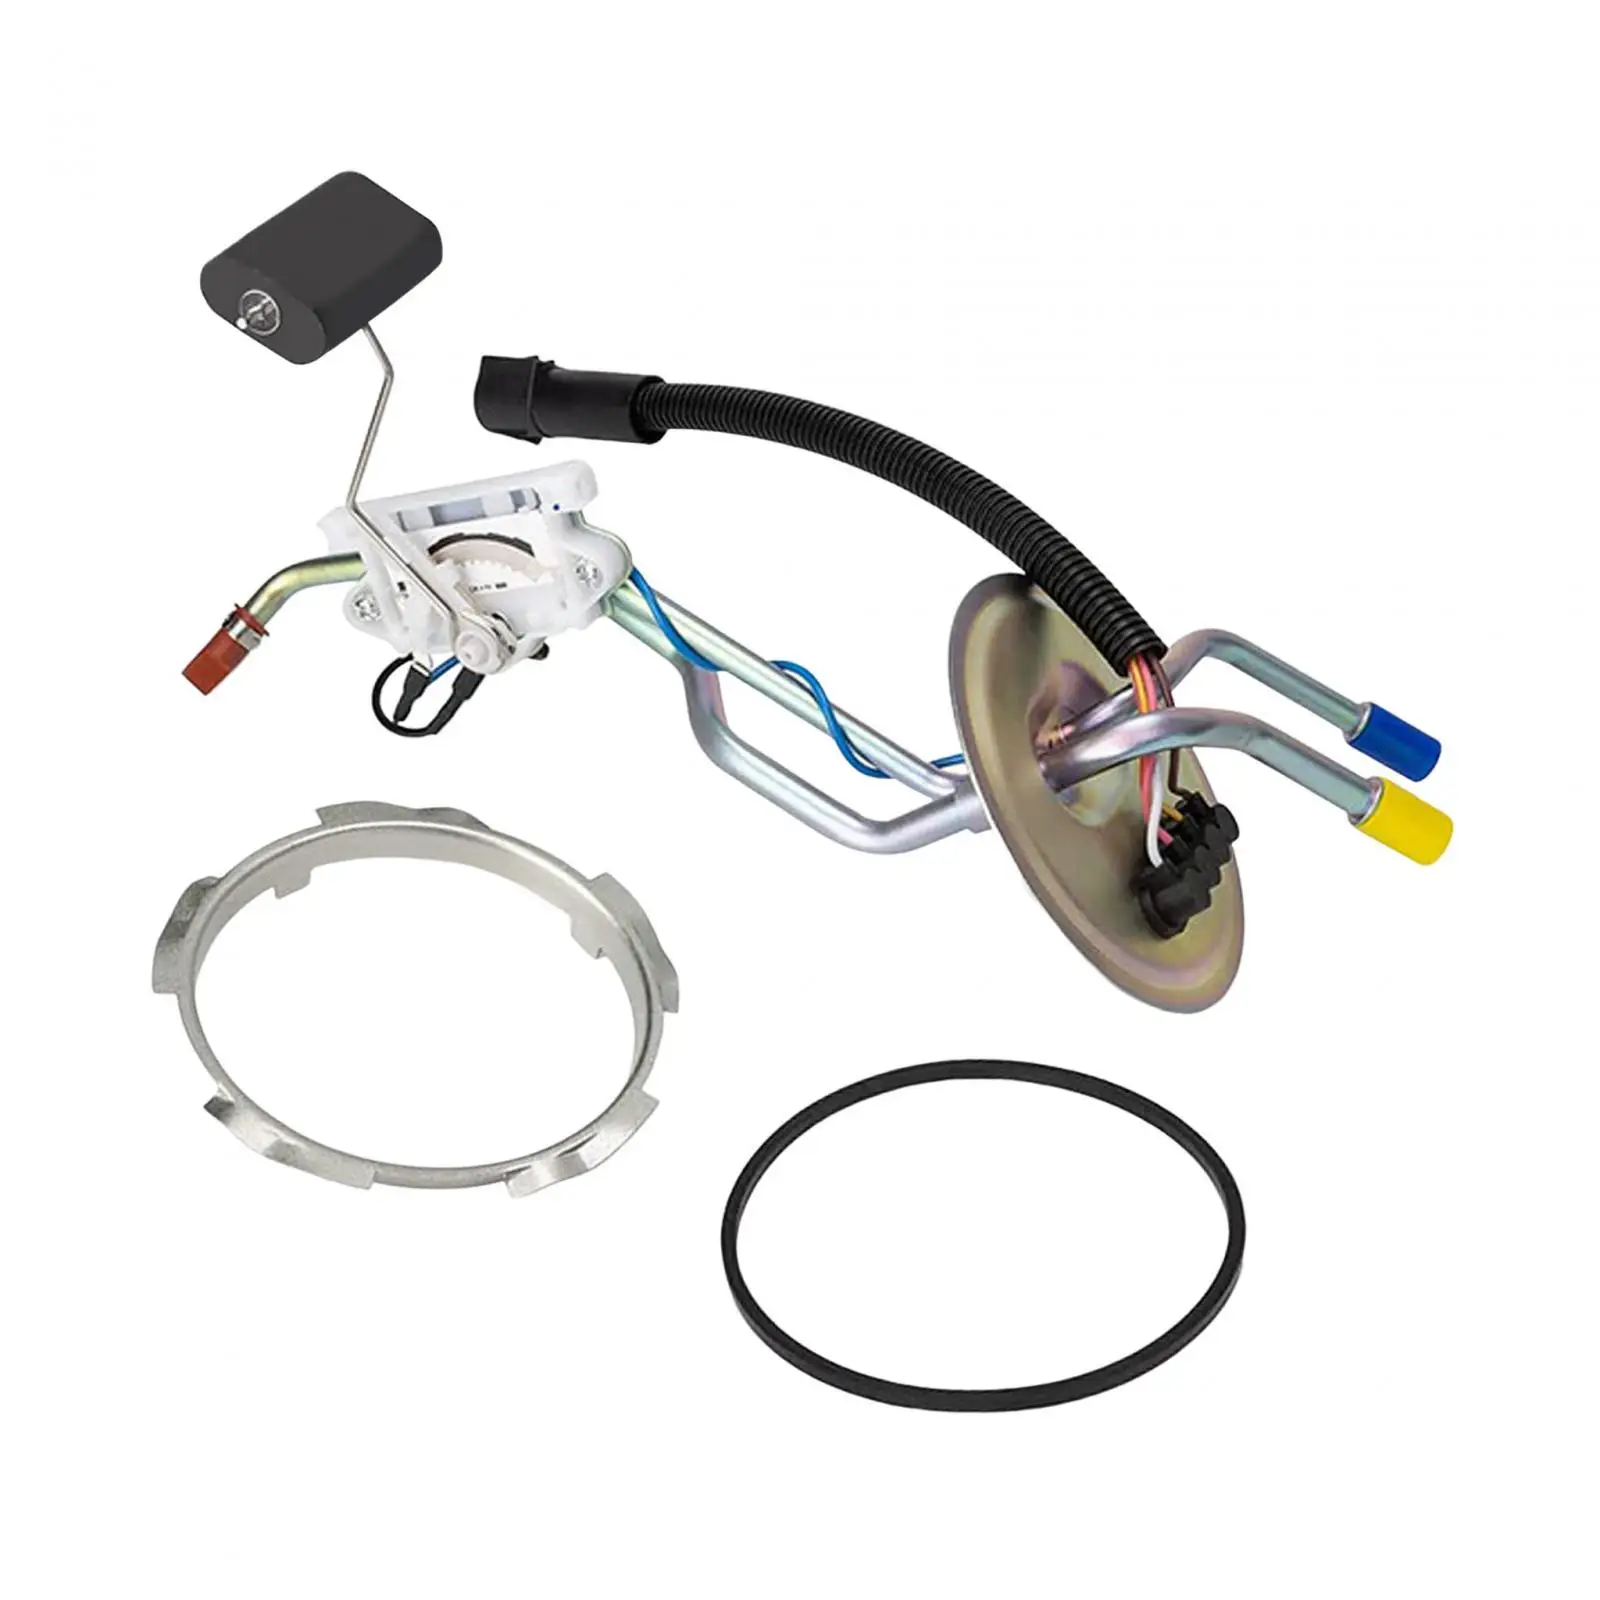 Fuel Pump Sending Unit Repair Parts for Ford F250 F350 94-97 Accessories Professional Easy Installation